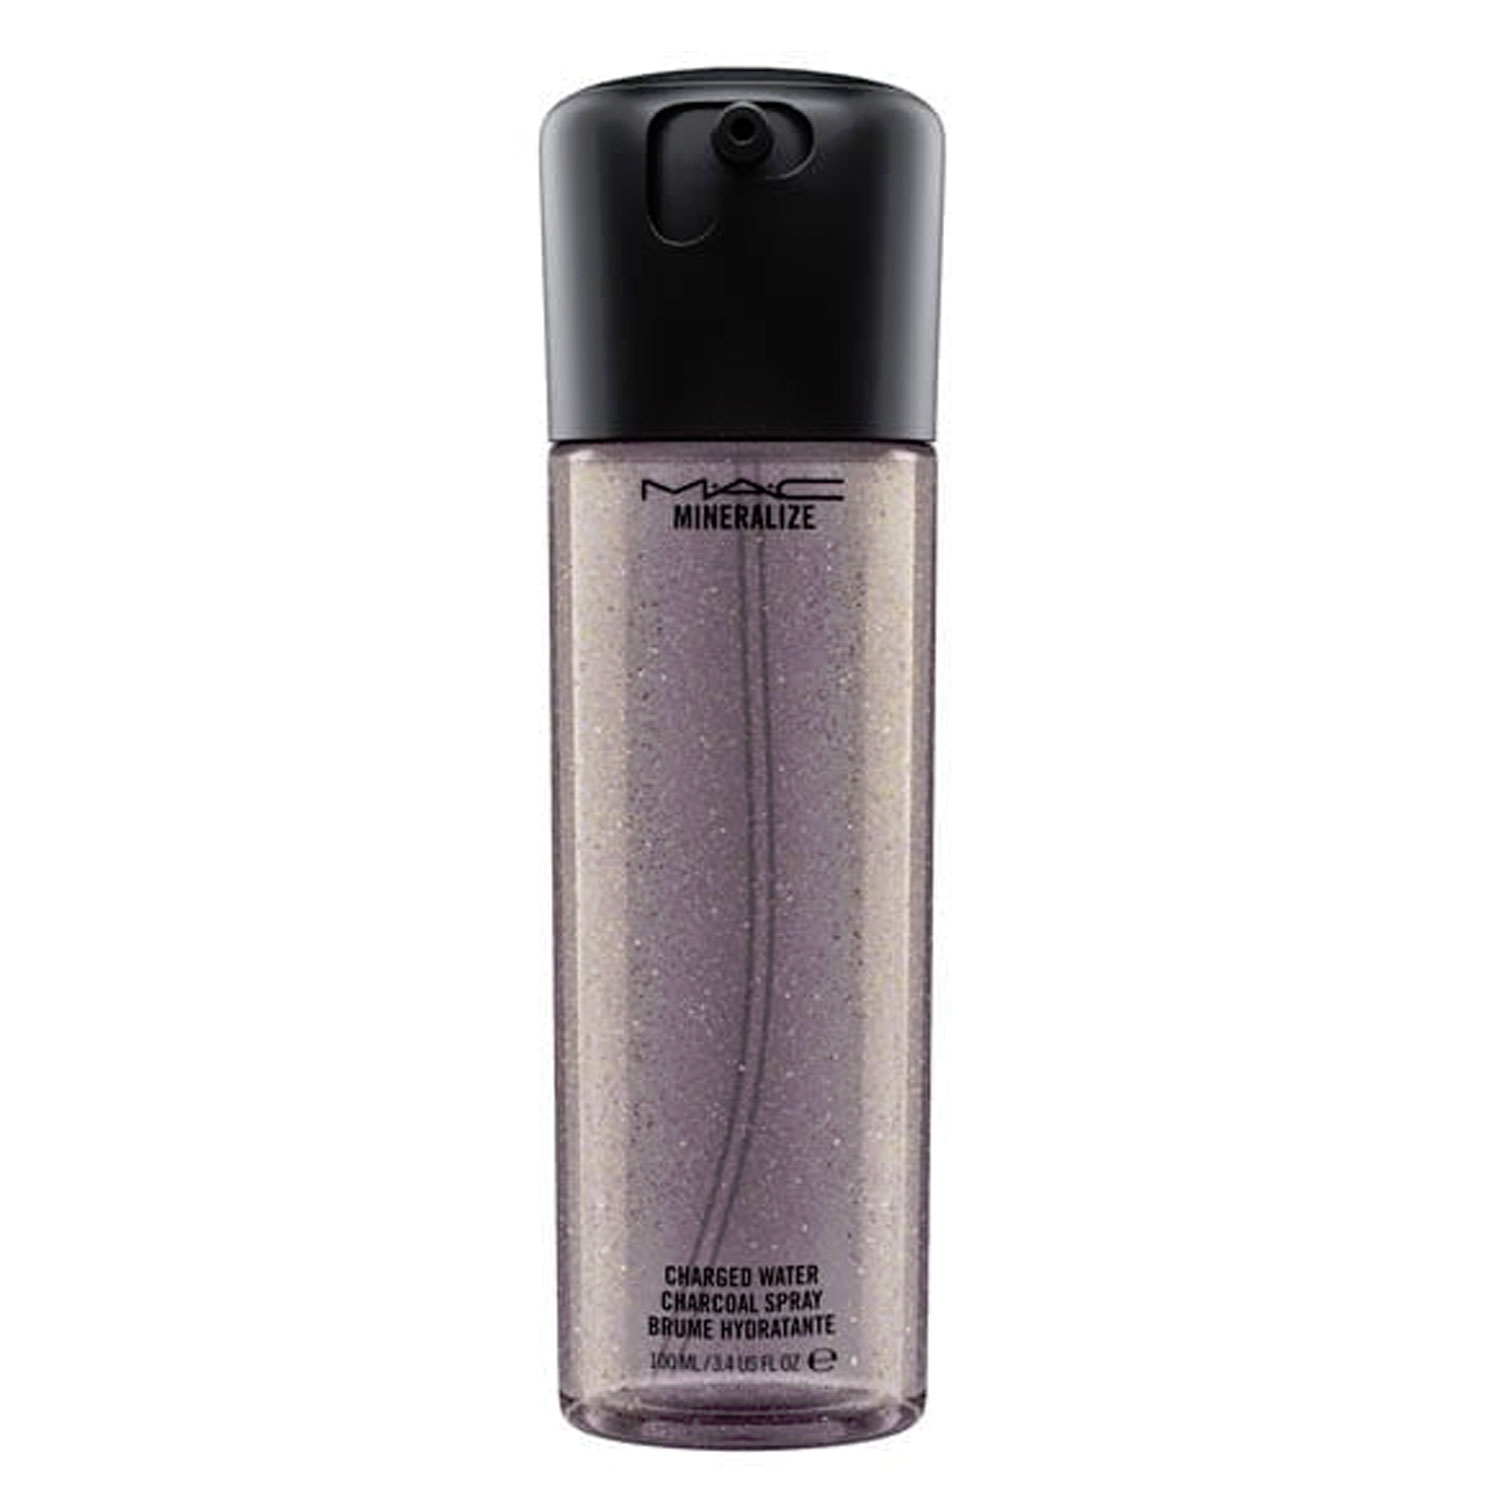 Product image from M·A·C Skin Care - Mineralize Charged Water Charcoal Spray